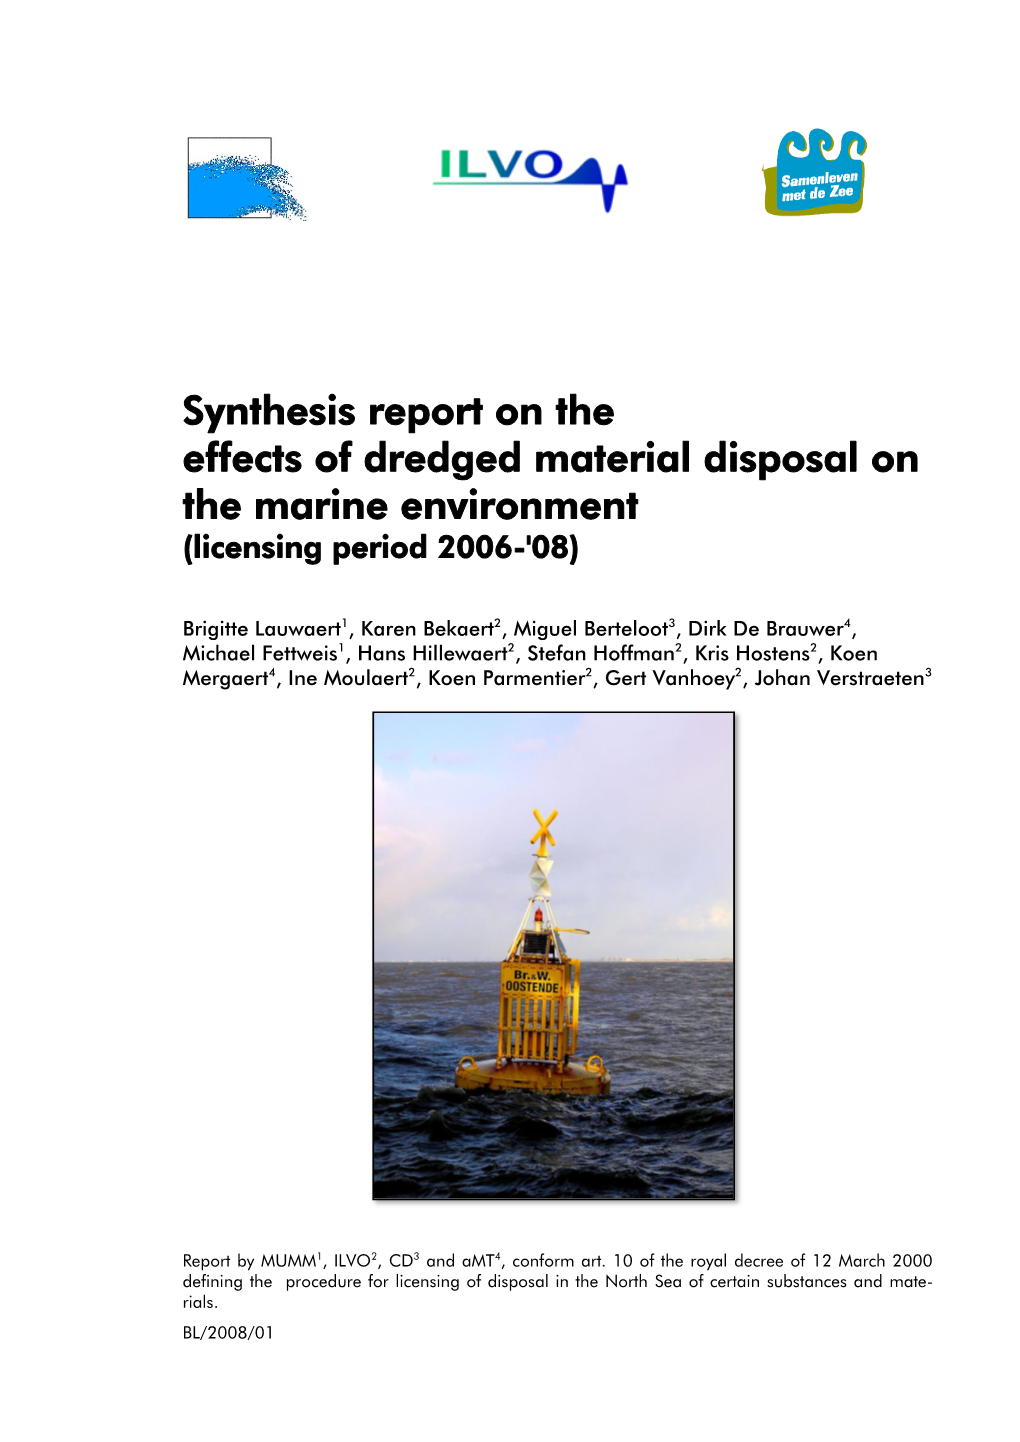 Synthesis Report on the Effects of Dredged Material Disposal on the Marine Environment (Licensing Period 2006-'08)